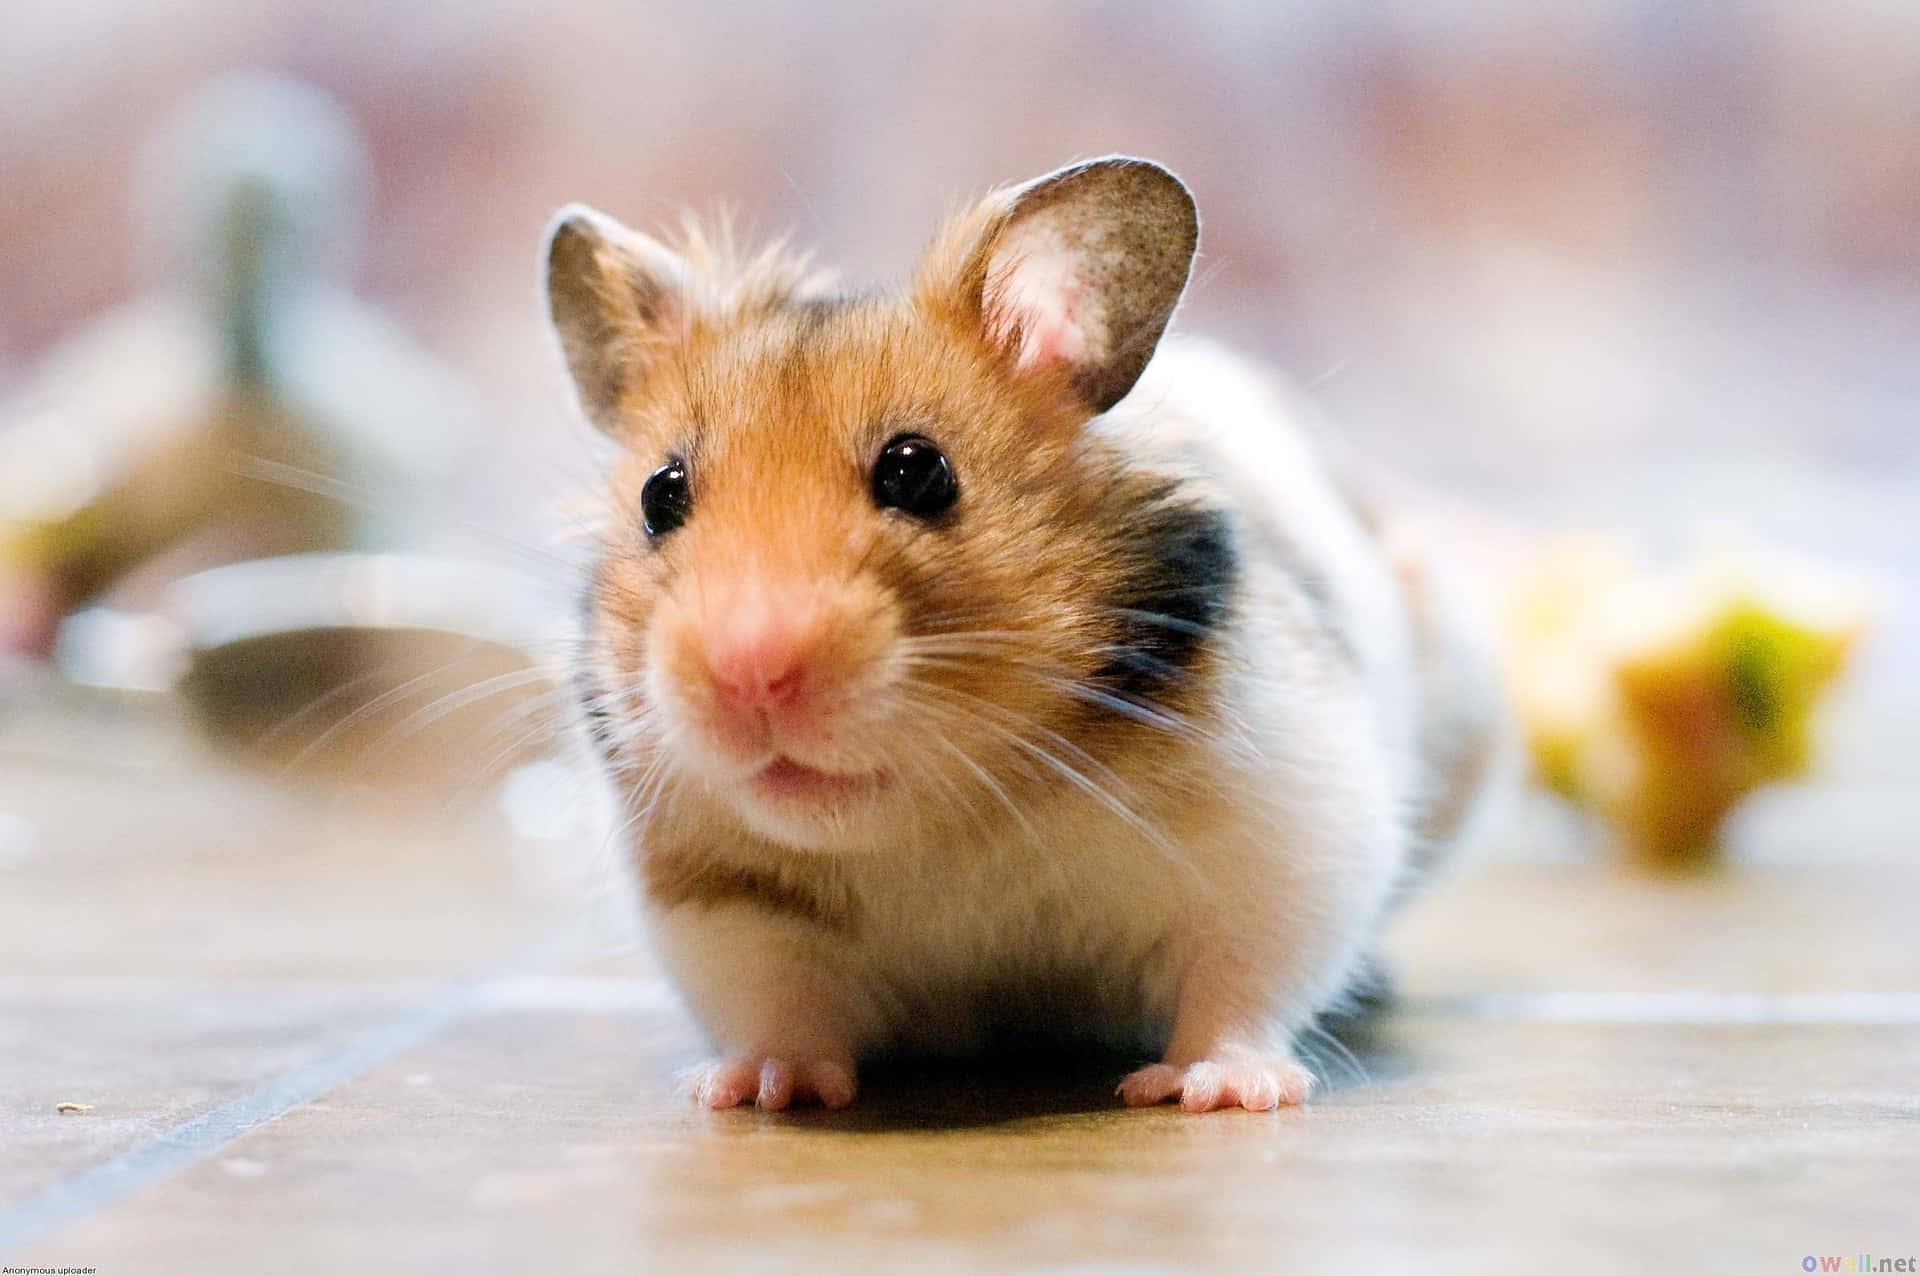 A Hamster Is Standing On A Tile Floor Wallpaper